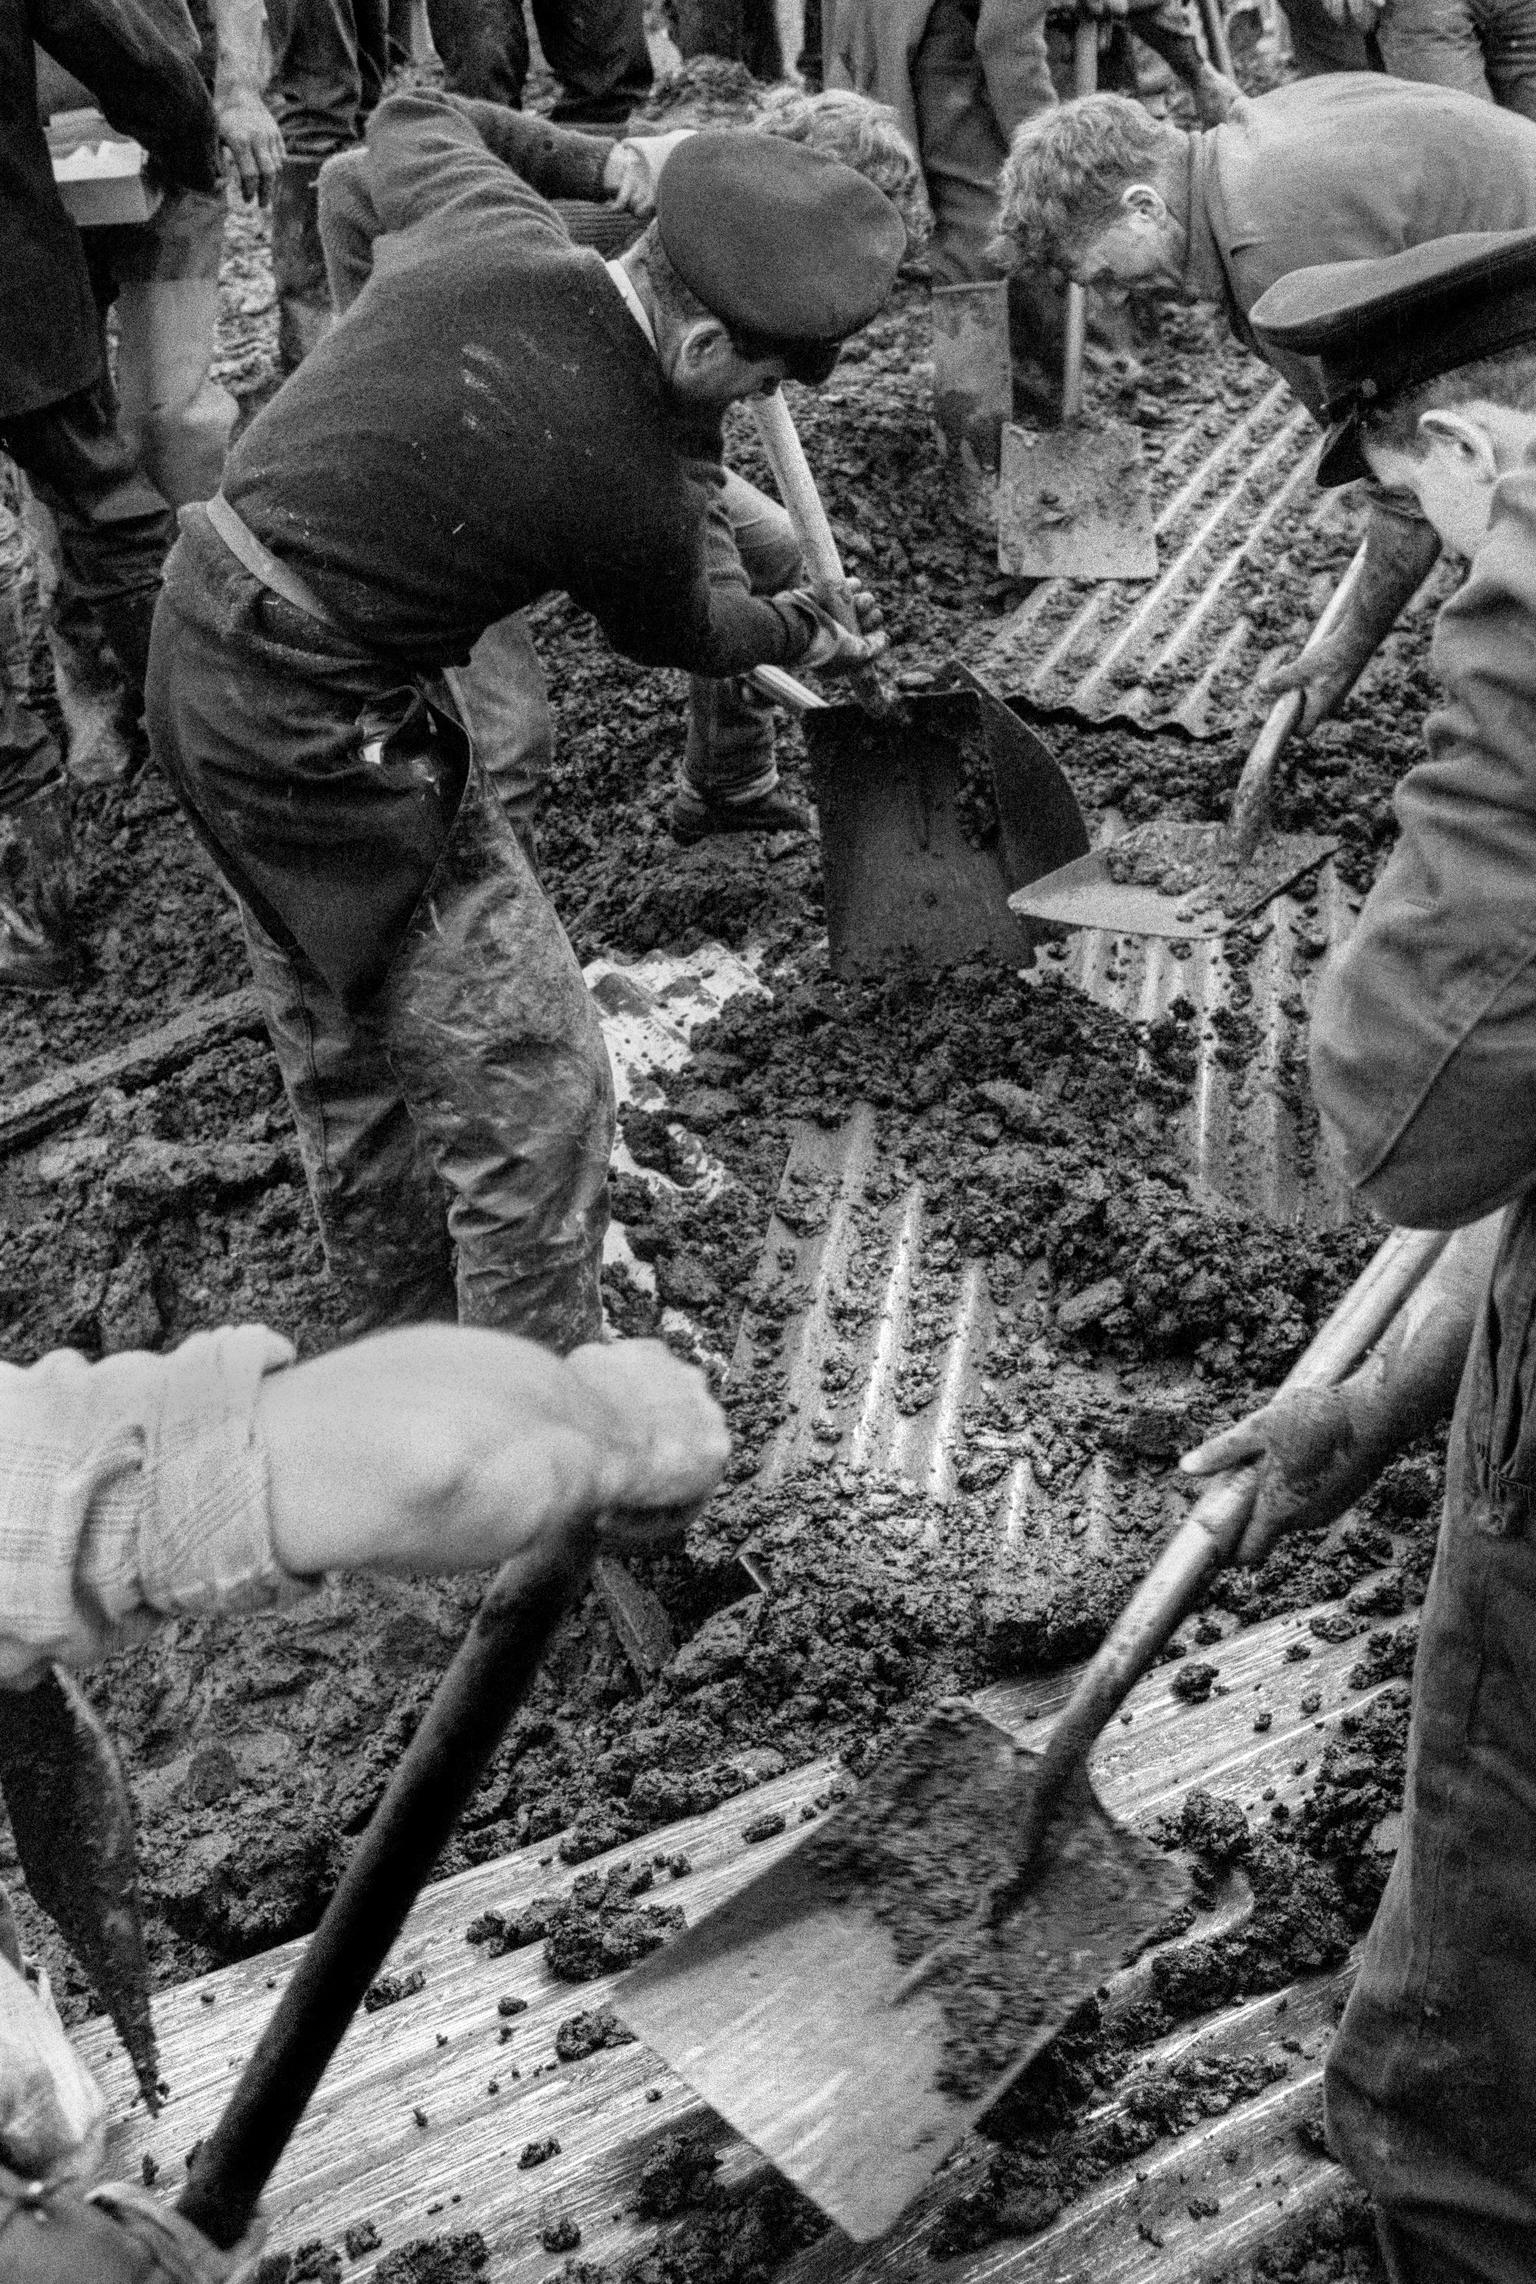 The Aberfan disaster was a catastrophic collapse of a colliery spoil in the Welsh village of Aberfan